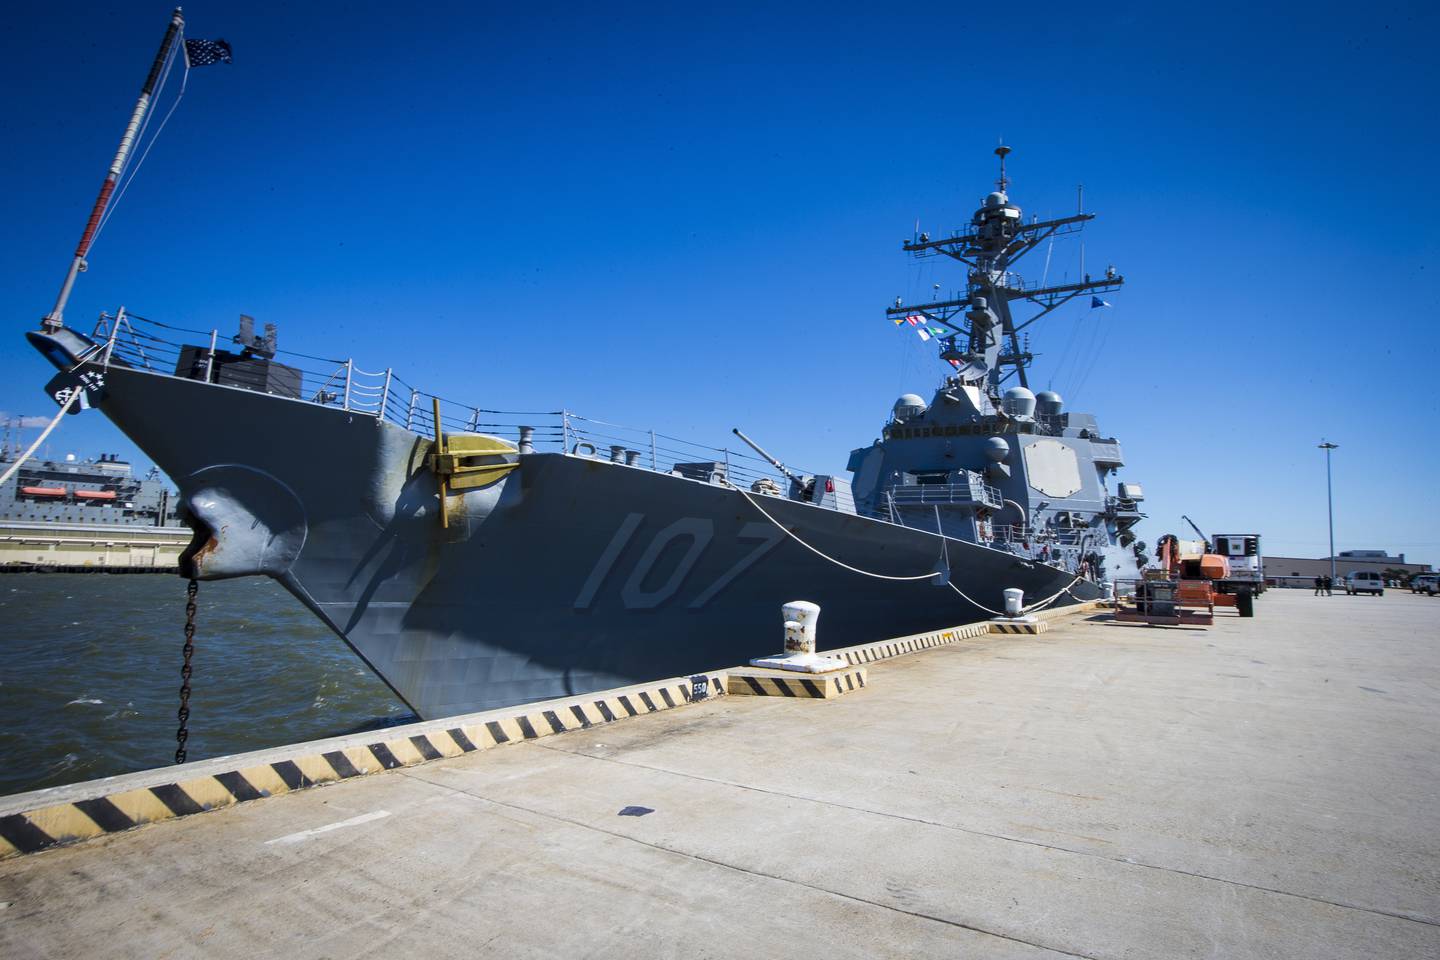 The Arleigh Burke-class destroyer USS Gravely is docked at its home port Norfolk Naval Station in Norfolk, Va. on Tuesday, March 14, 2023.